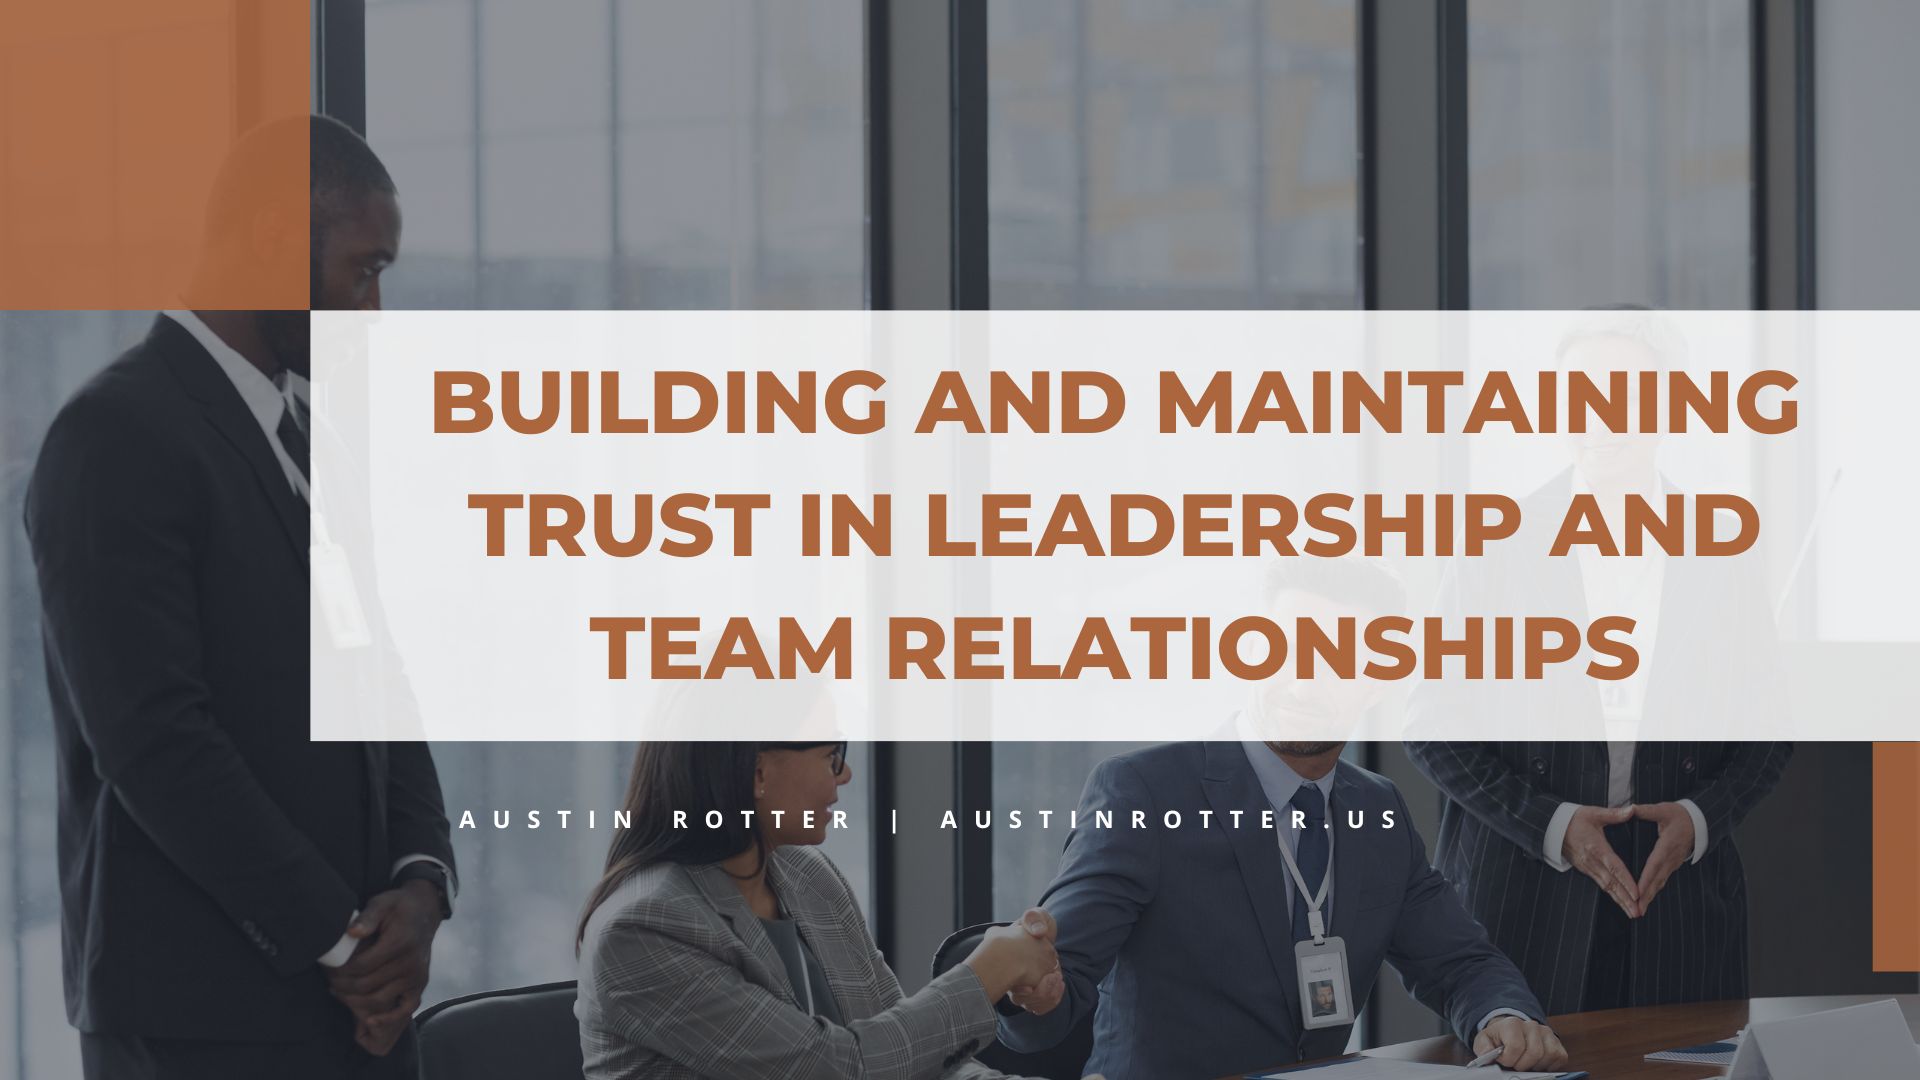 BUILDING AND MAINTAINING
TRUST IN LEADERSHIP AND

TEAM RELATIONSHIPS